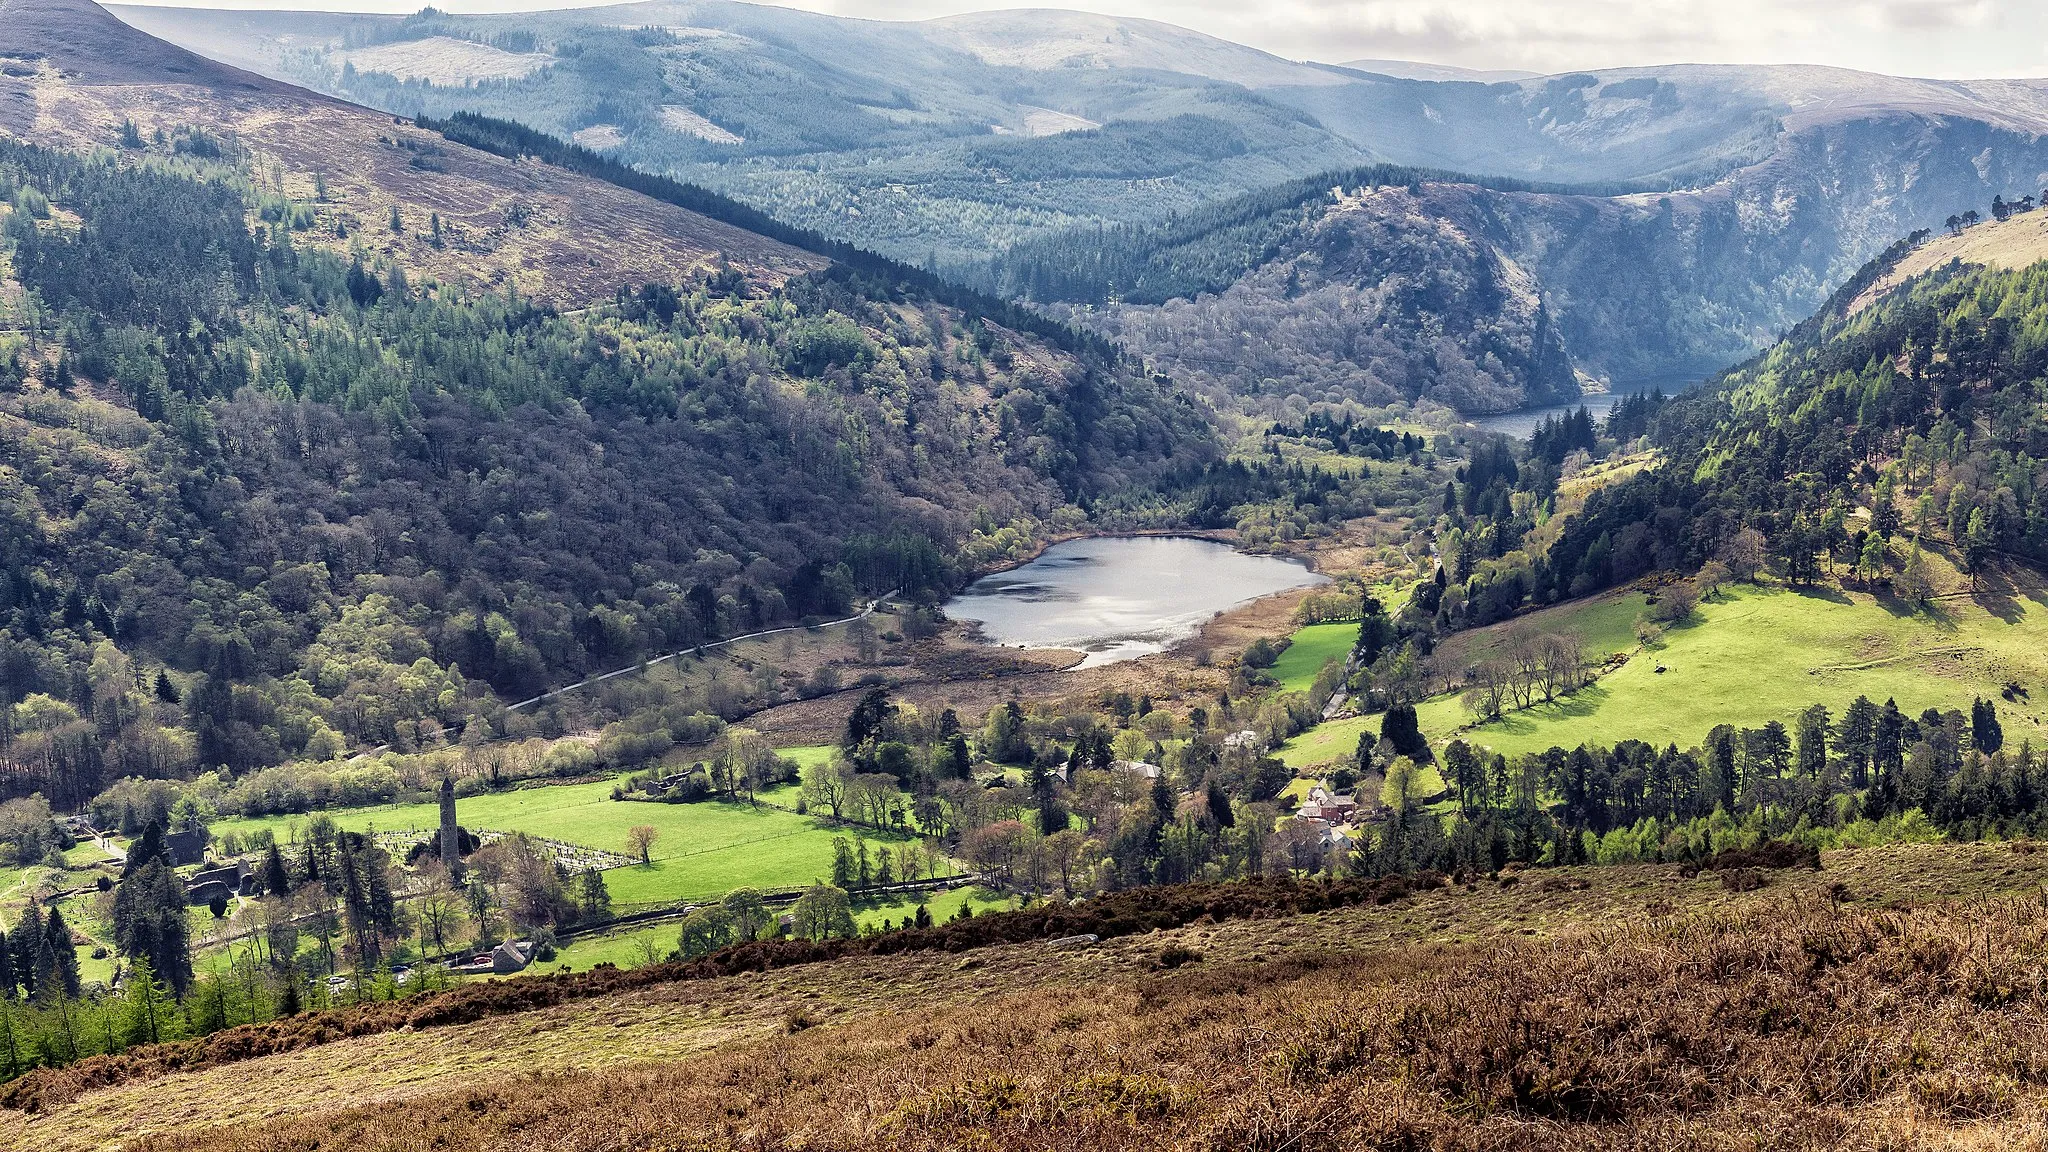 Photo showing: Photograph of the Glendalough Valley, County Wicklow, Ireland, facing south-west, taken from the south-east slope of Brockagh Mountain, showing the early Christian monastic settlement, the Lower Lake and the Upper Lake that give Glendalough ("The Valley of the Two Lakes") its name, flanked to the south by Derrybawn Mountain and Lugduff Spink and to the north by Camaderry Mountain.